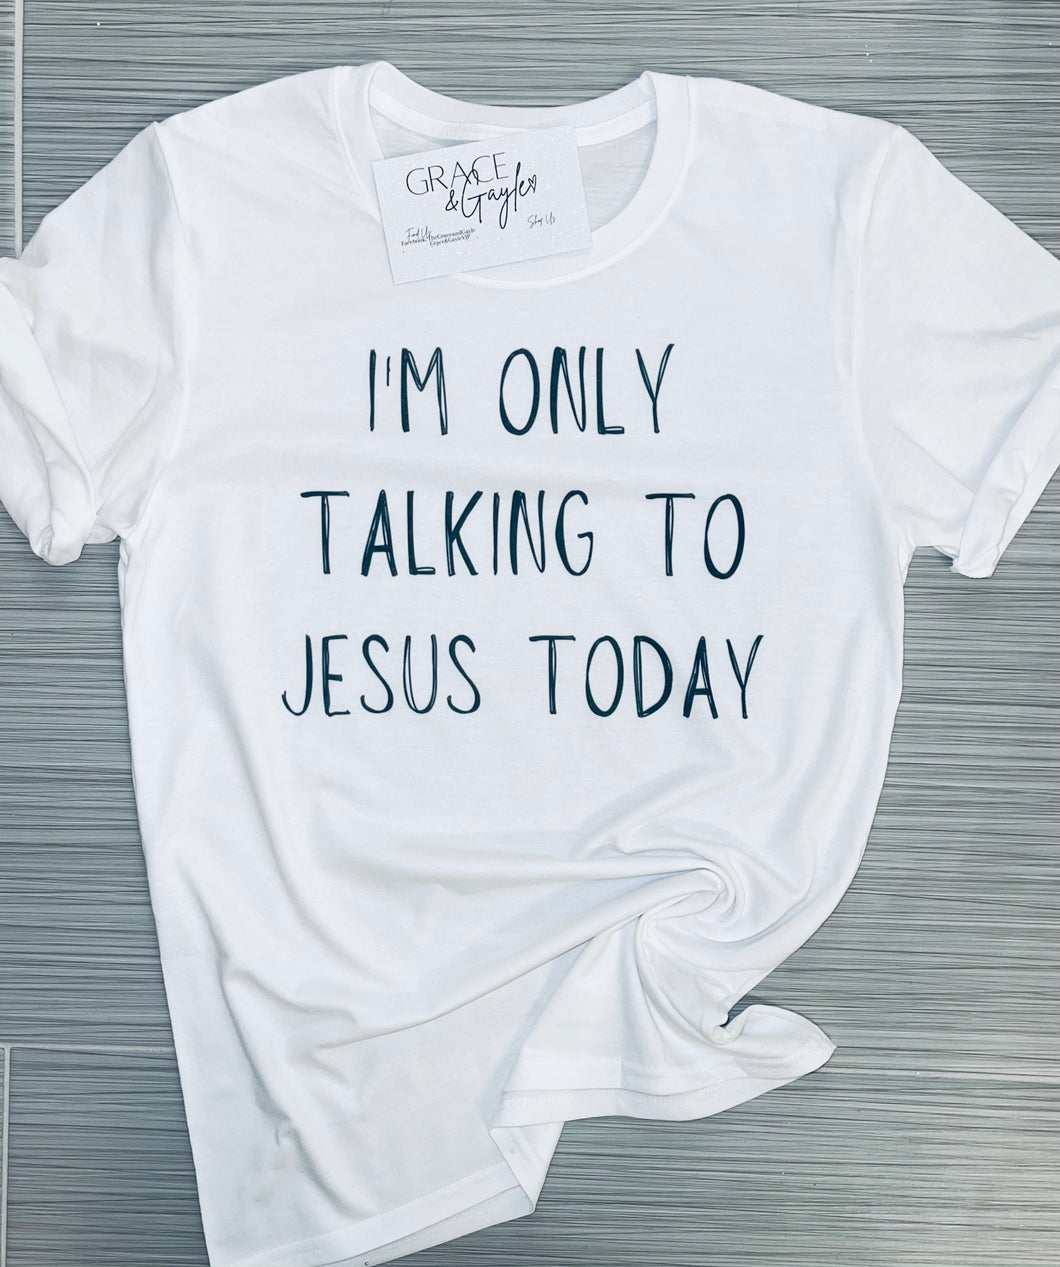 I'm only talking to Jesus today t shirt.